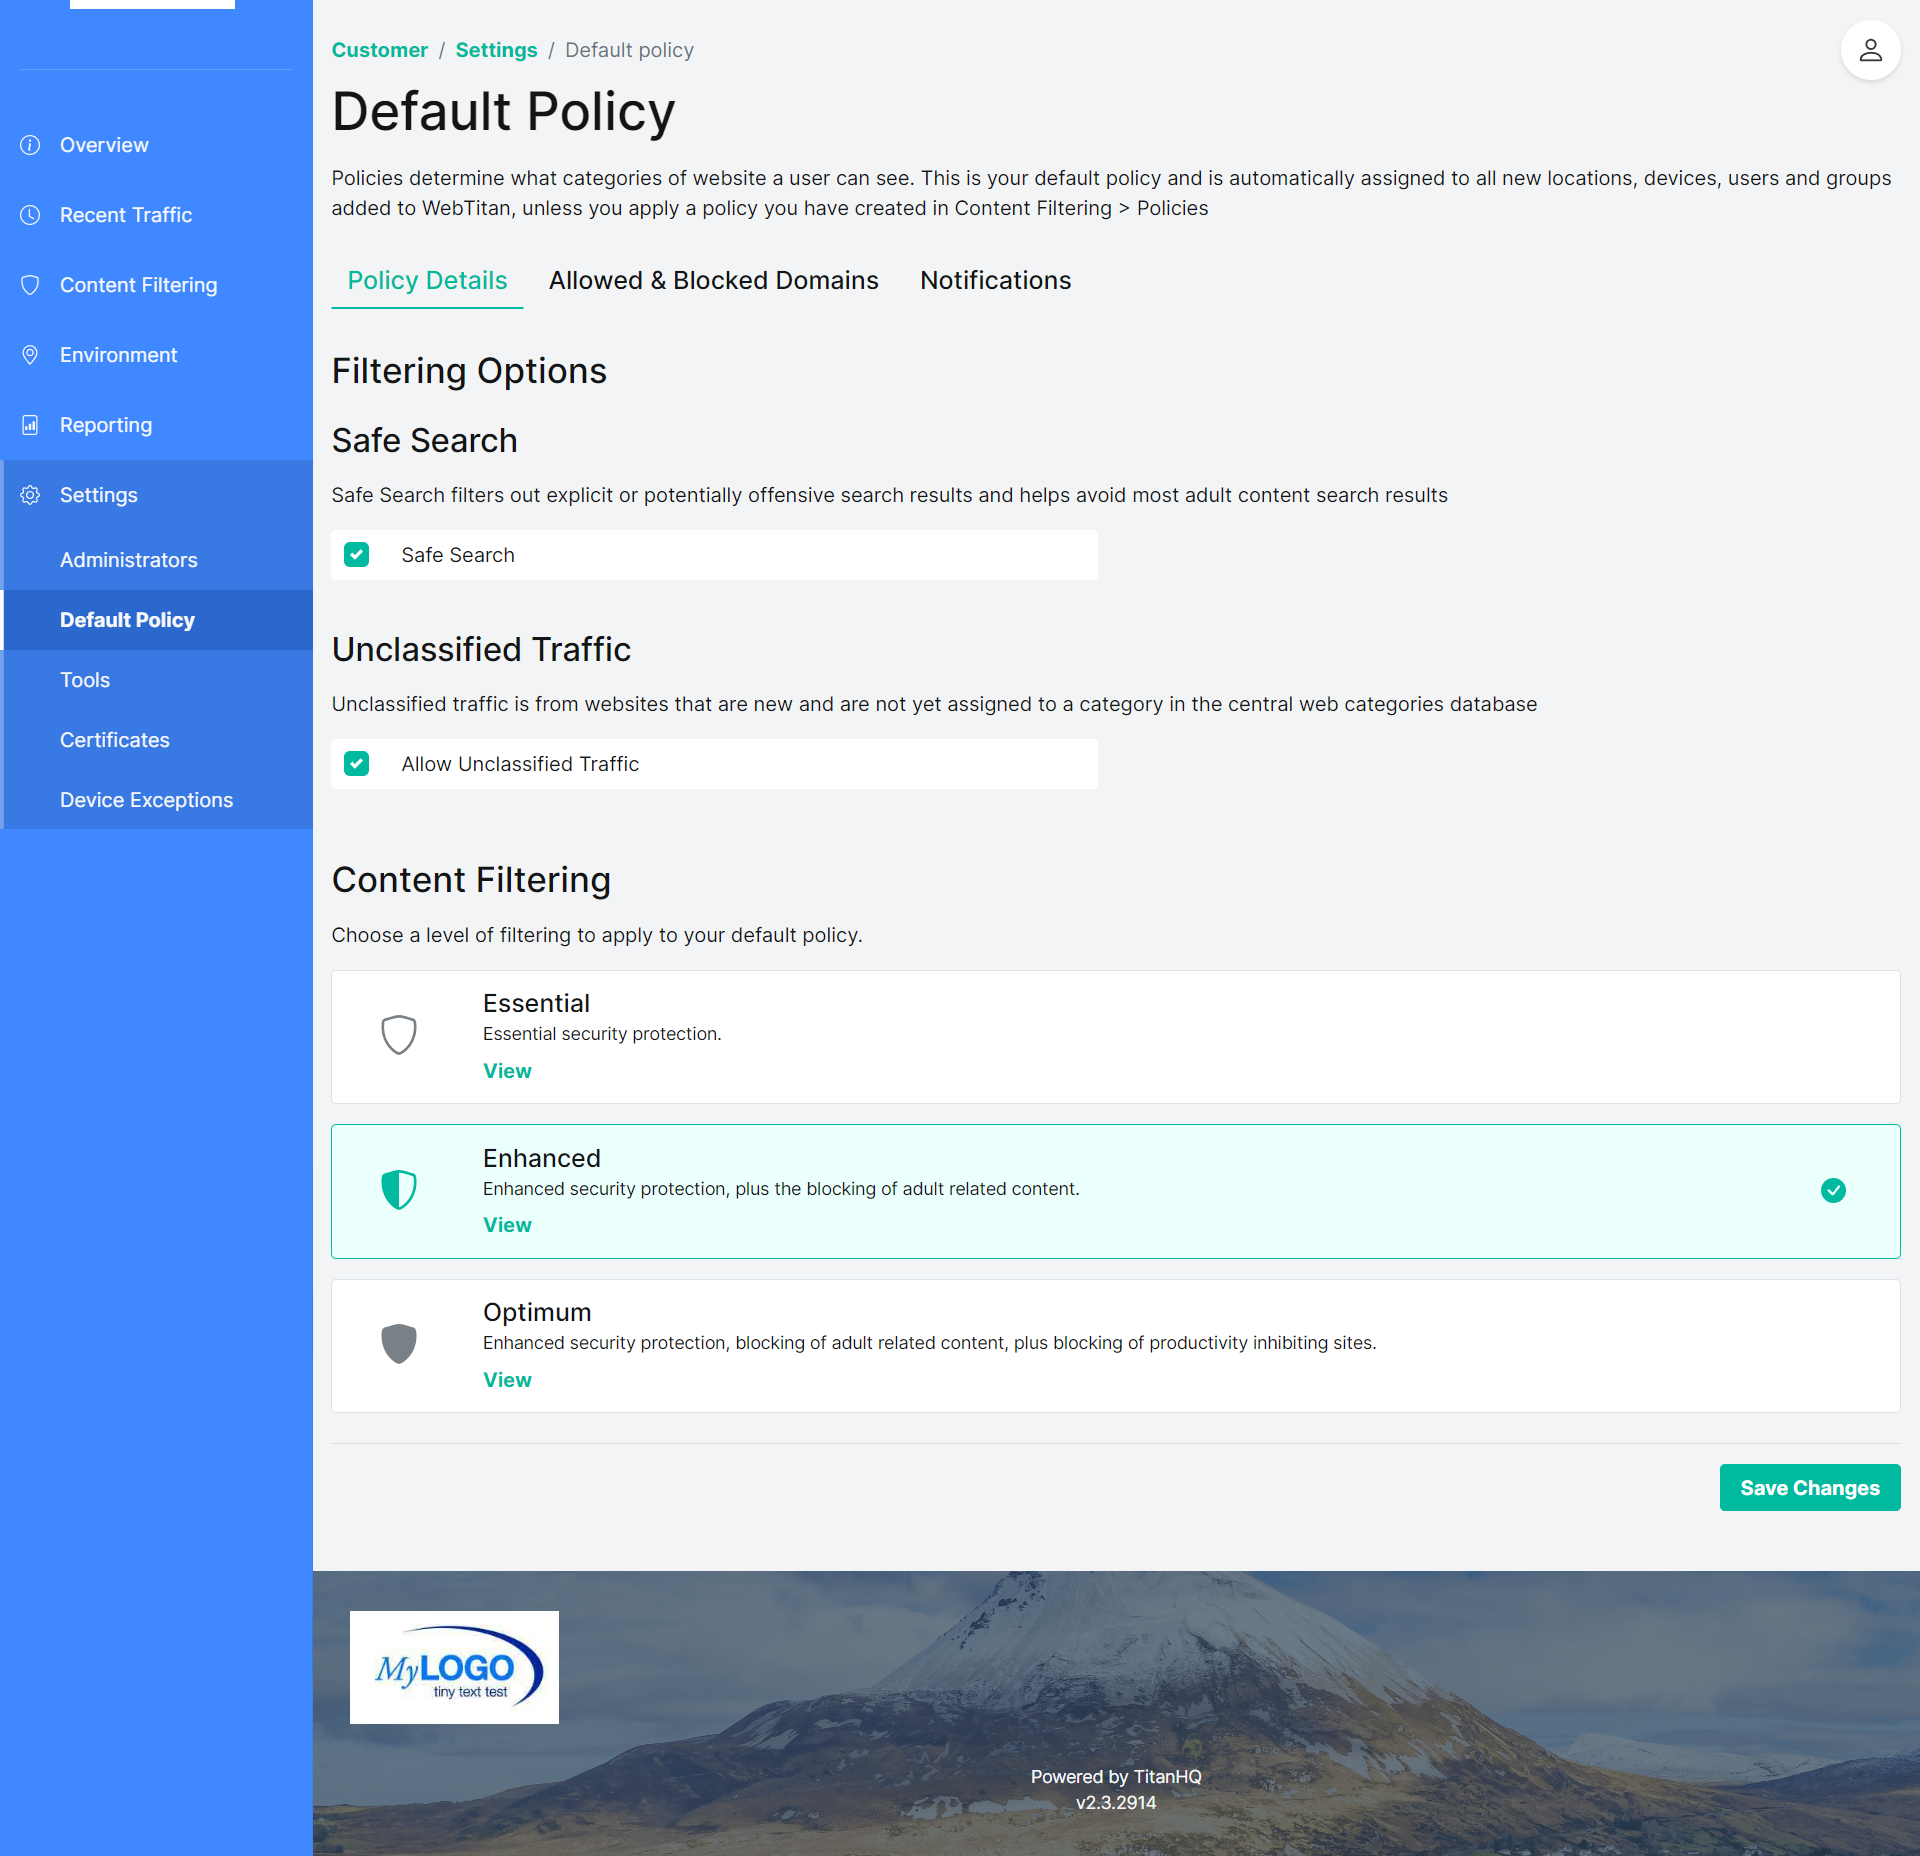 Default Policy - Settings